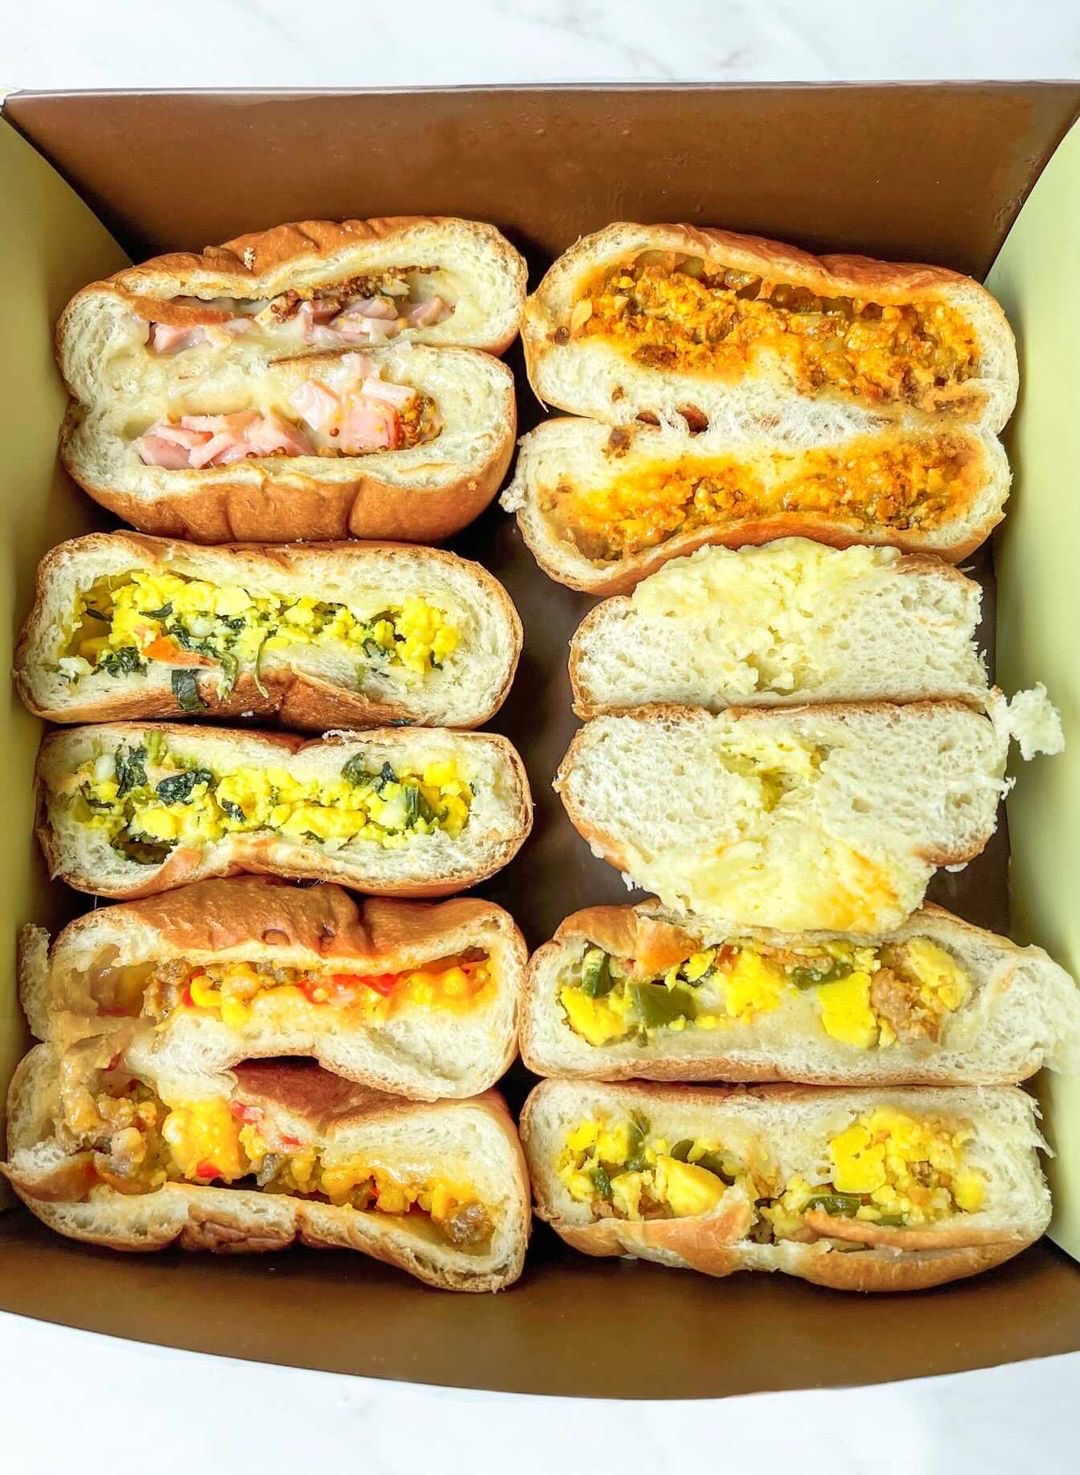 A box filled with halved kolaches with different colorful fillings.